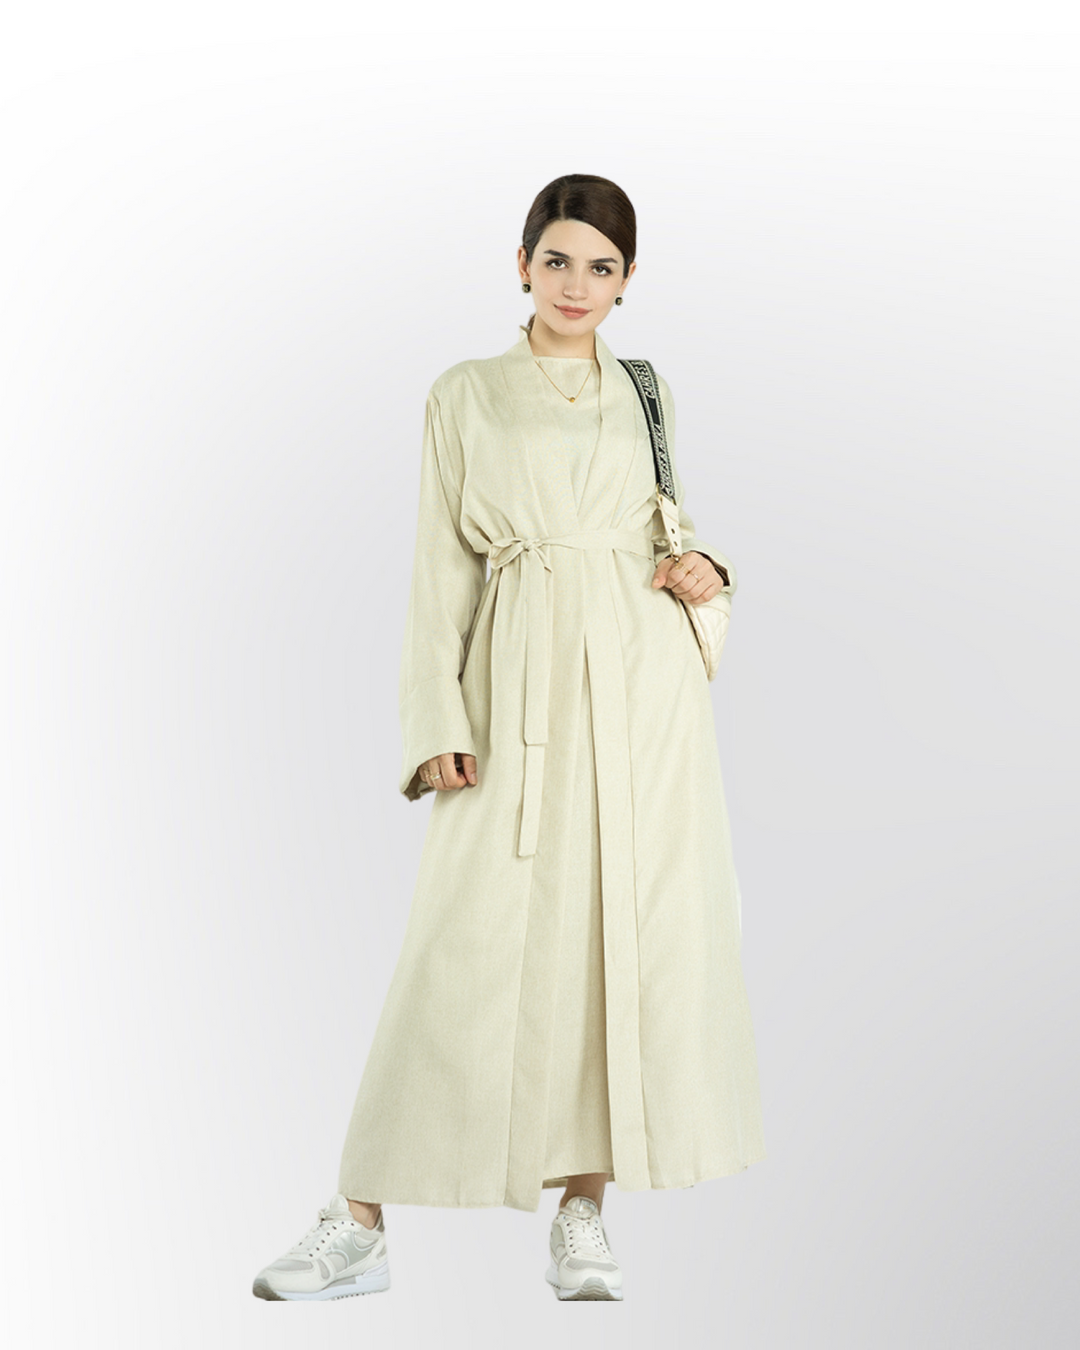 Get trendy with Elora Linen Set - Cream - Dresses available at Voilee NY. Grab yours for $99.90 today!